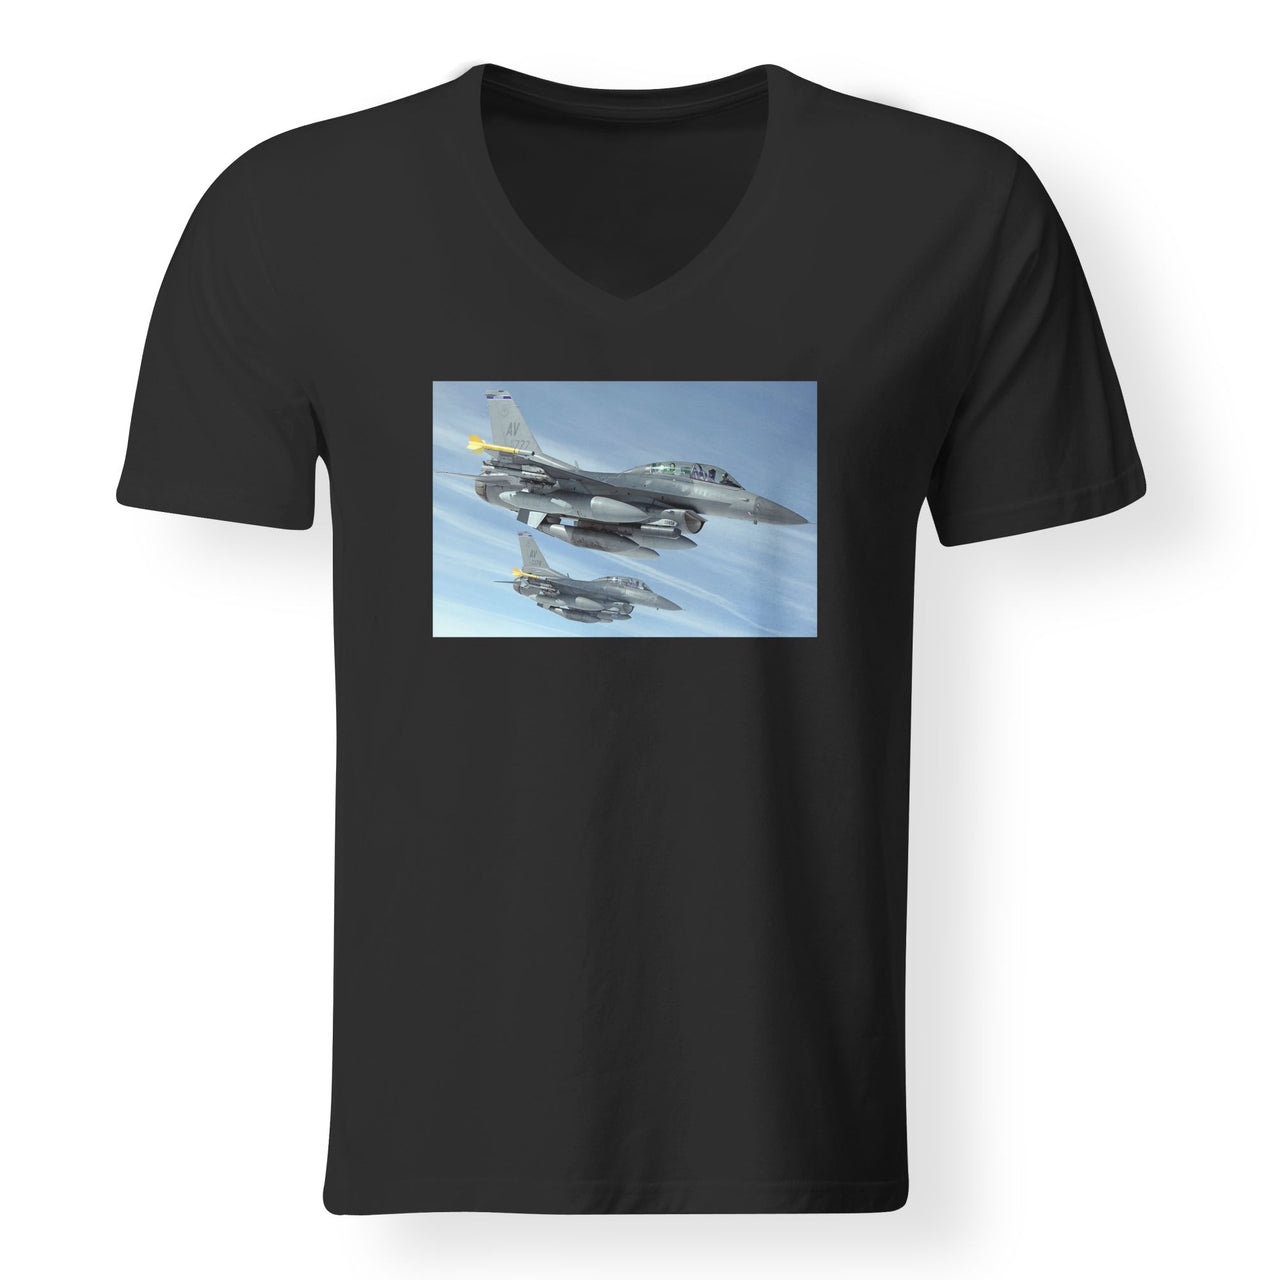 Two Fighting Falcon Designed V-Neck T-Shirts